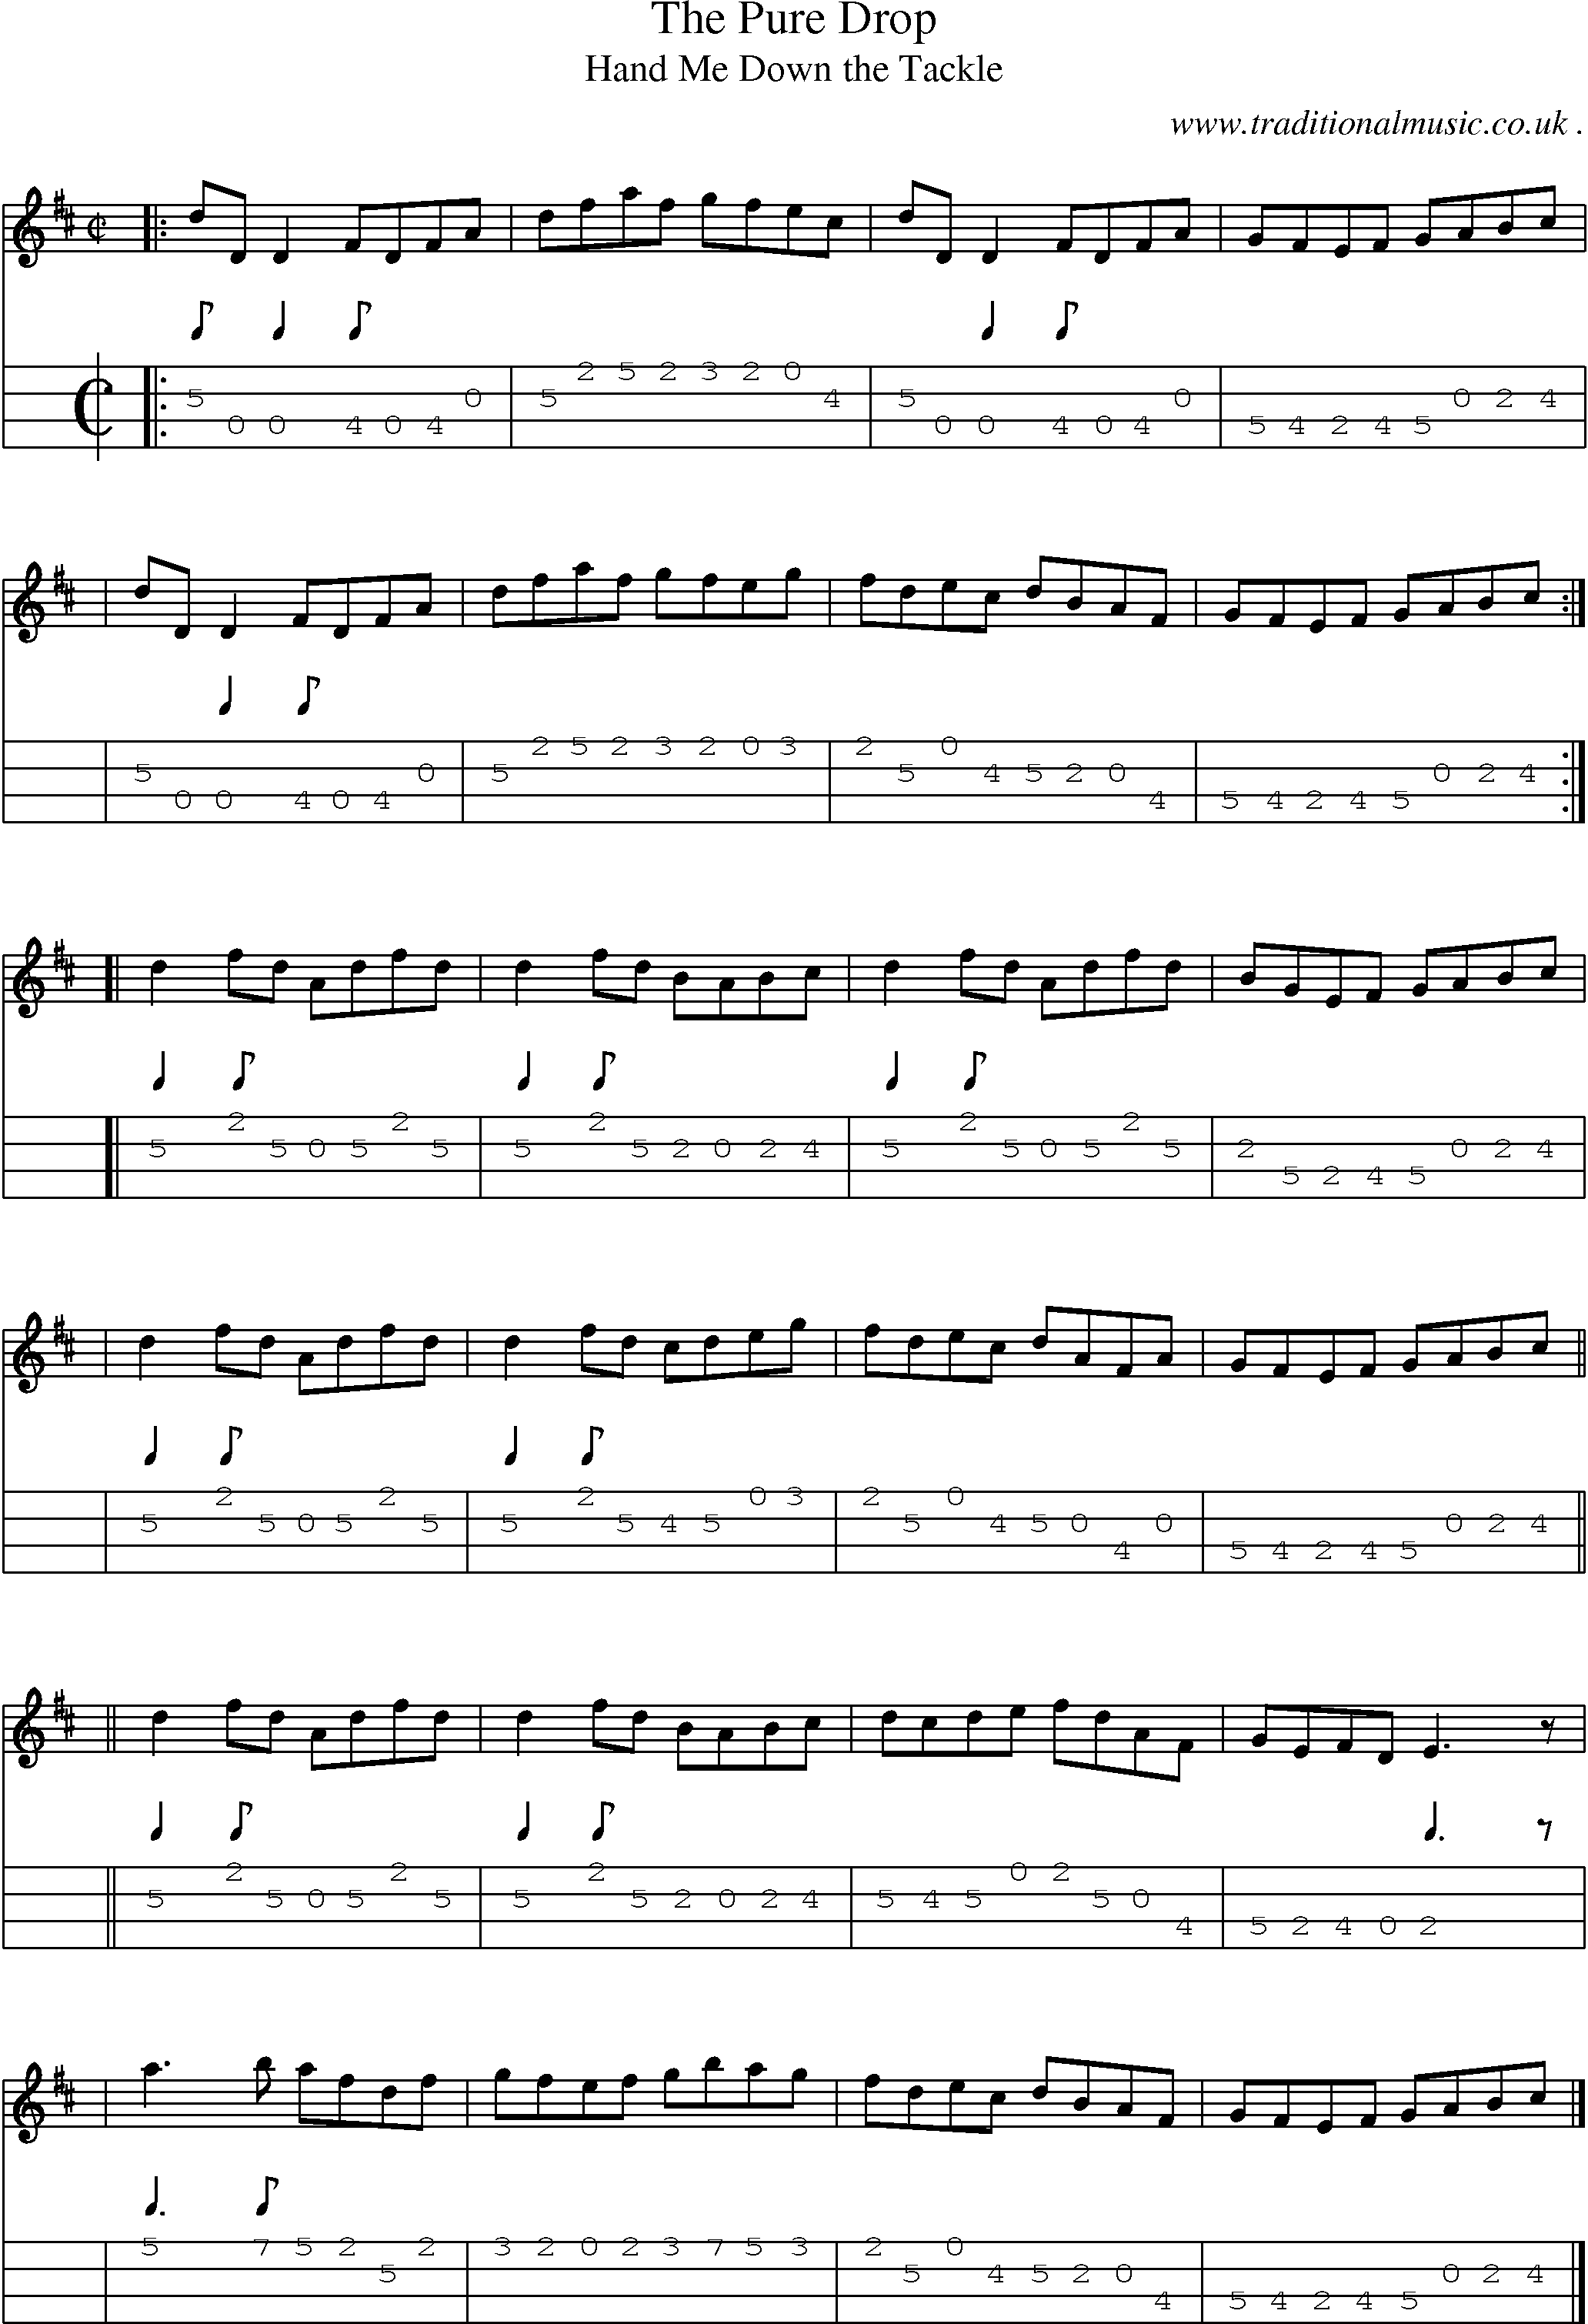 Sheet-music  score, Chords and Mandolin Tabs for The Pure Drop